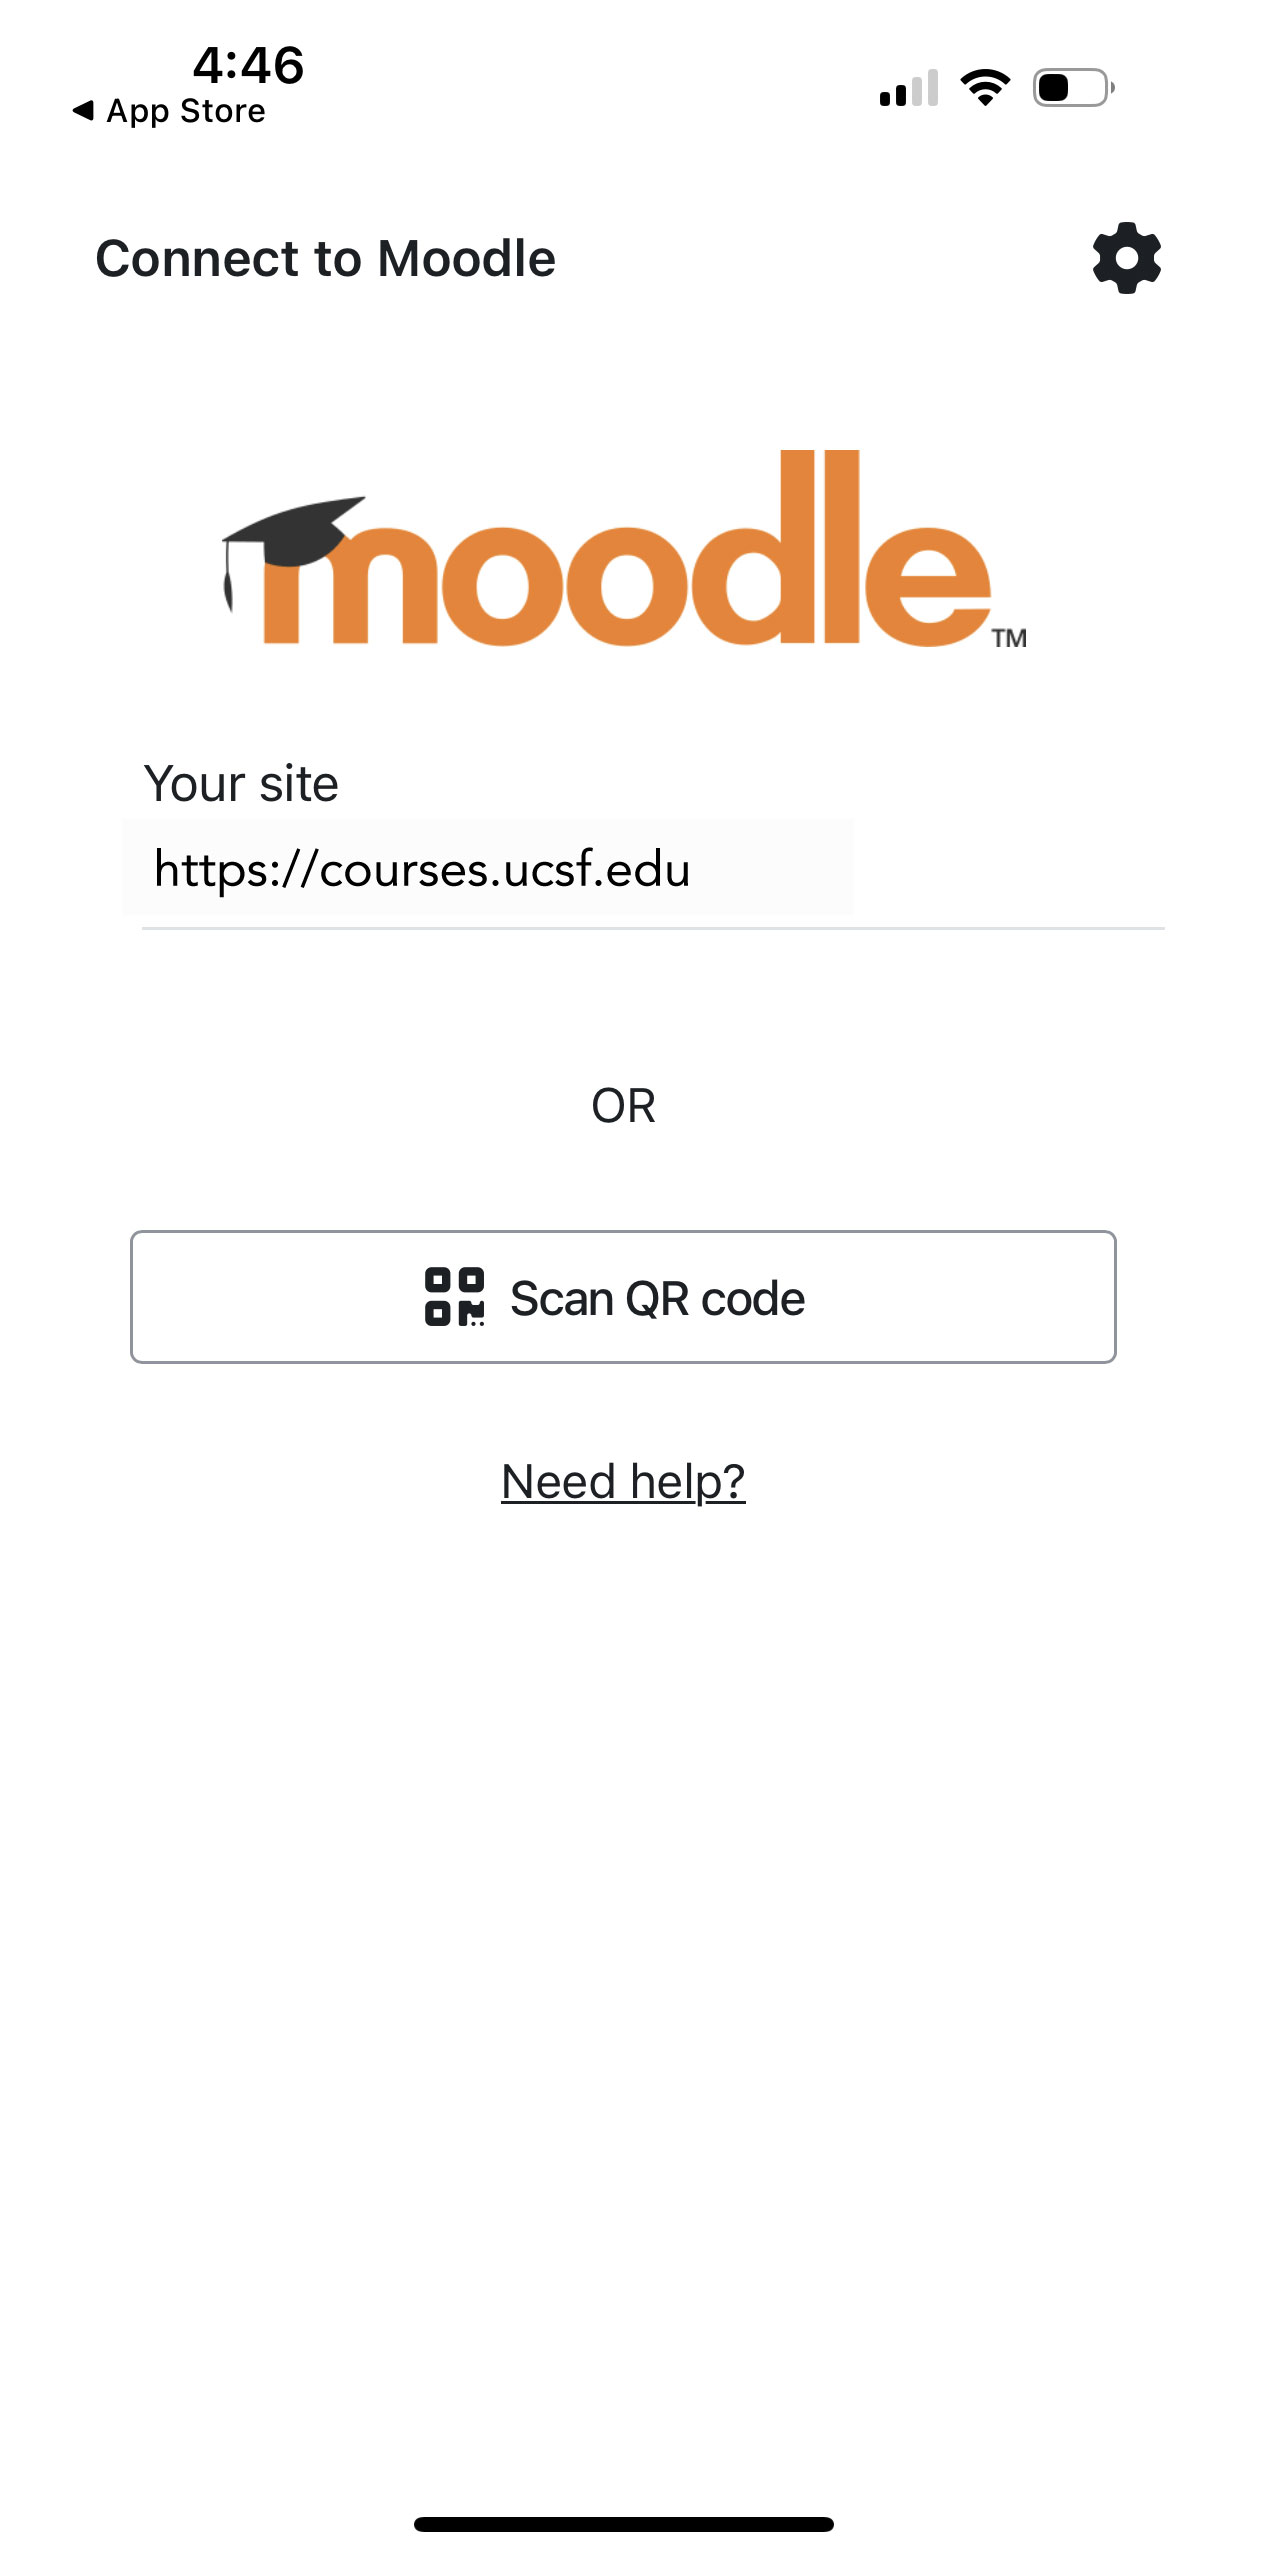 connect-to-moodle-mobile.jpg